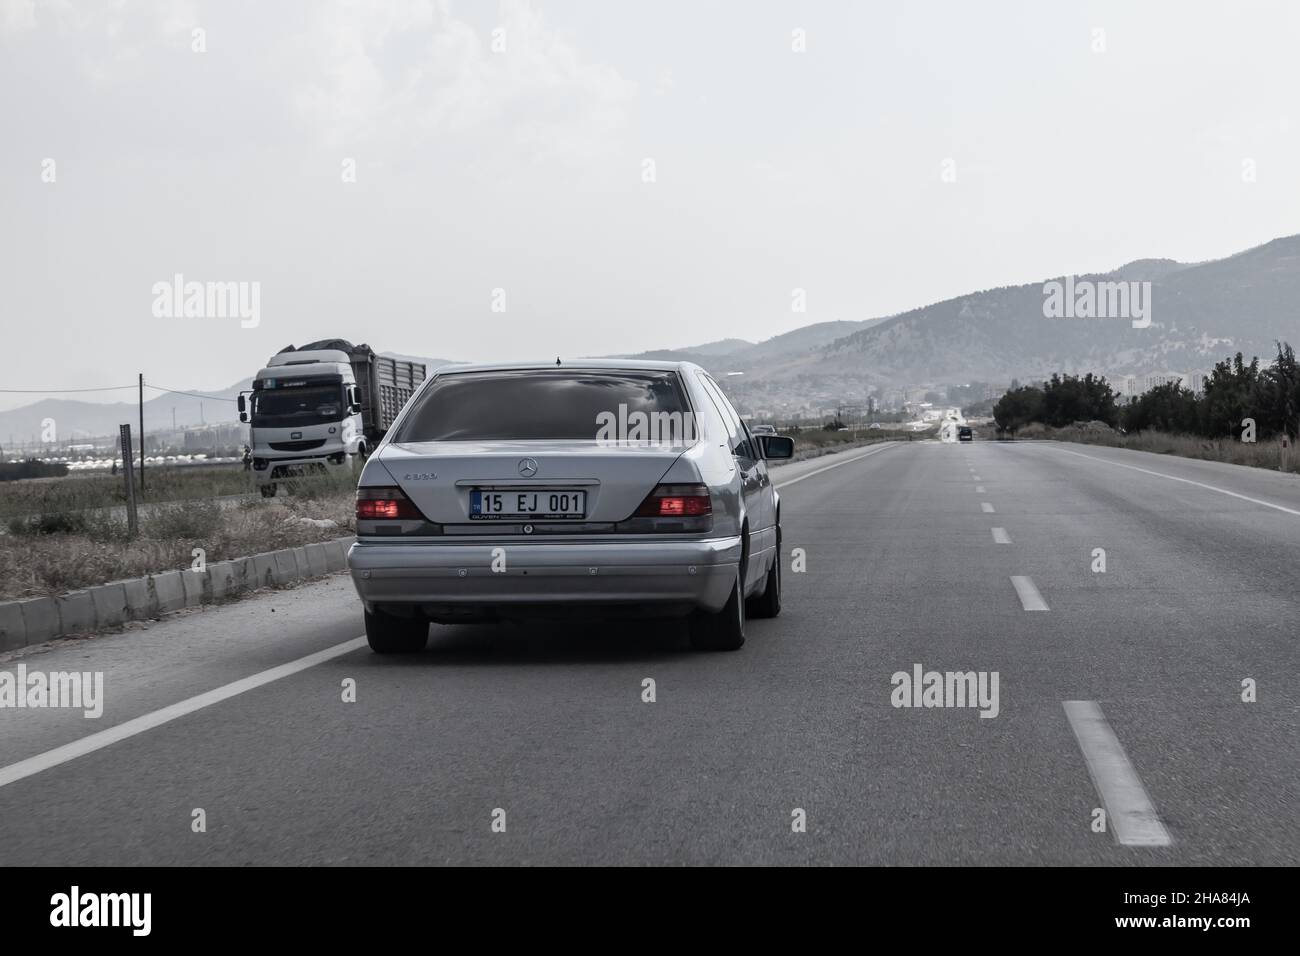 Antalya, Turkey - 08. 28. 2021: The legendary luxury car in the premium segment, the silver Mercedes-Benz W140 S-class s600, rides on the highway in T Stock Photo